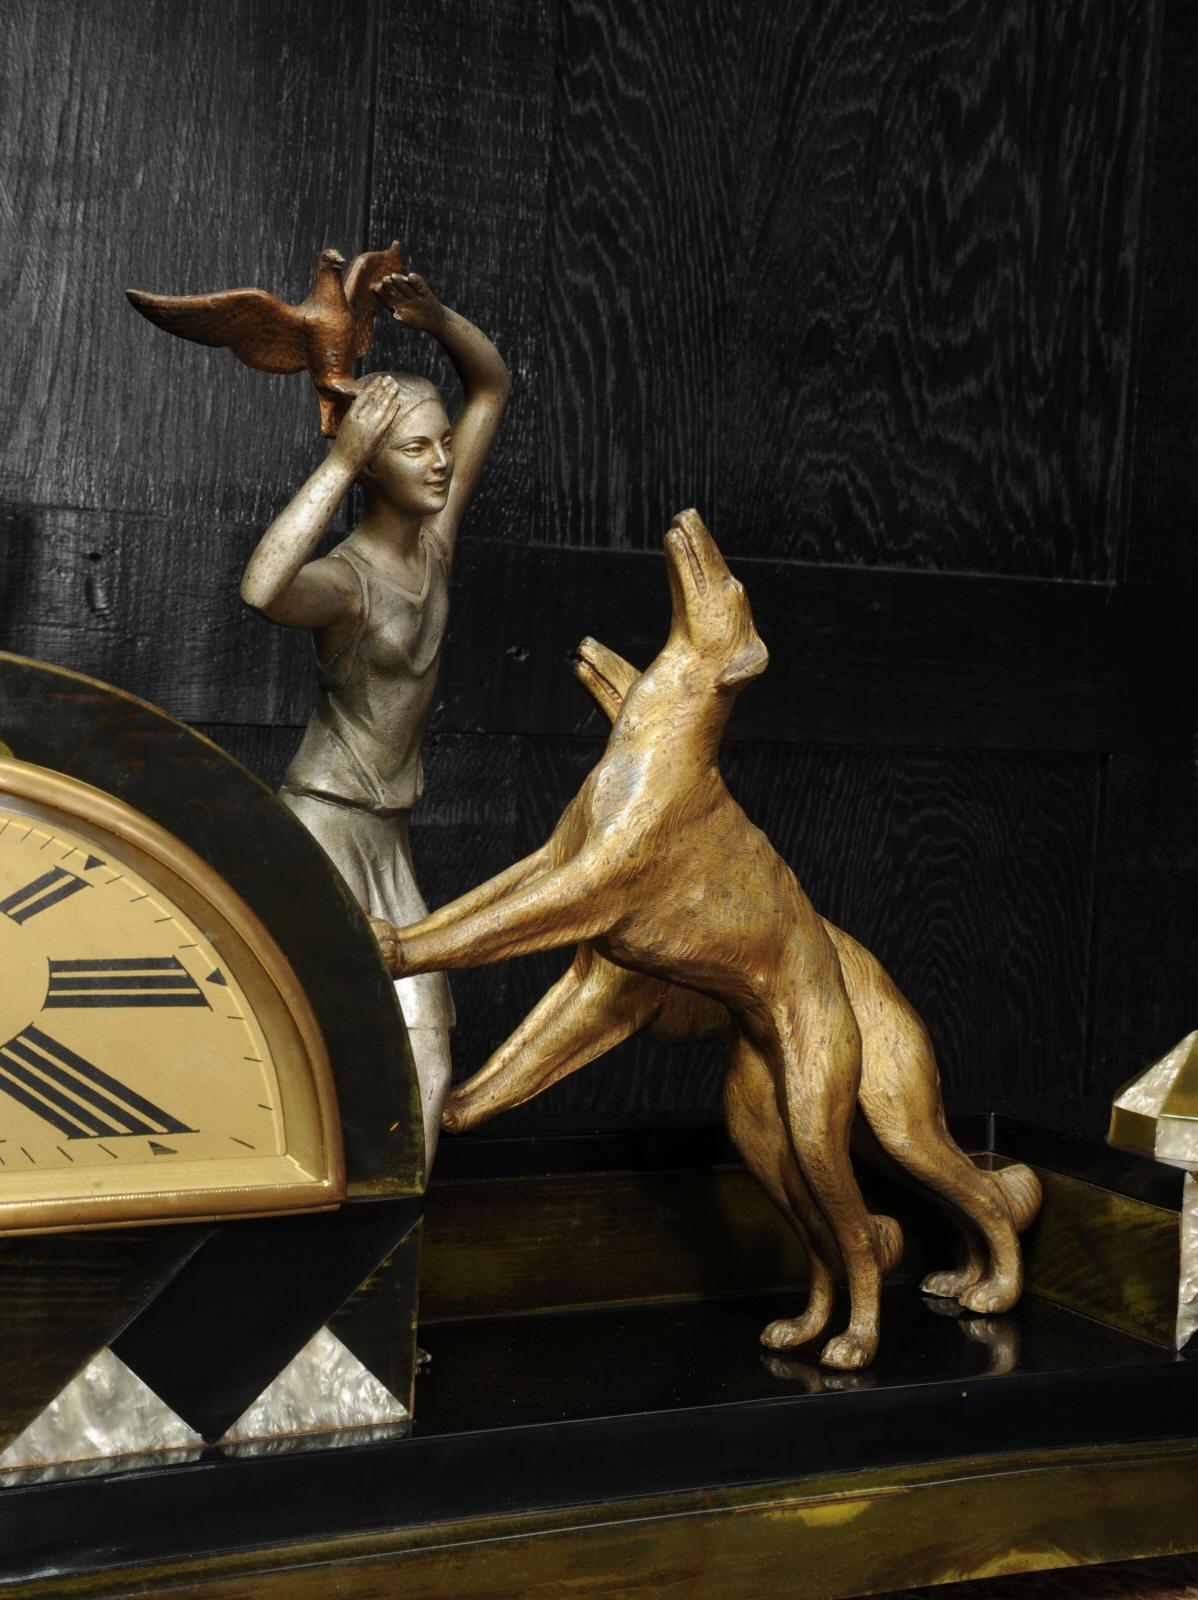 A stunning and rare clock by the well known sculptor Pierre Sega, circa 1925. It features a charming scene of a girl holding a bird aloft to save it from her two large and playful dogs. Beautifully modelled in colored and patinated white metal. The